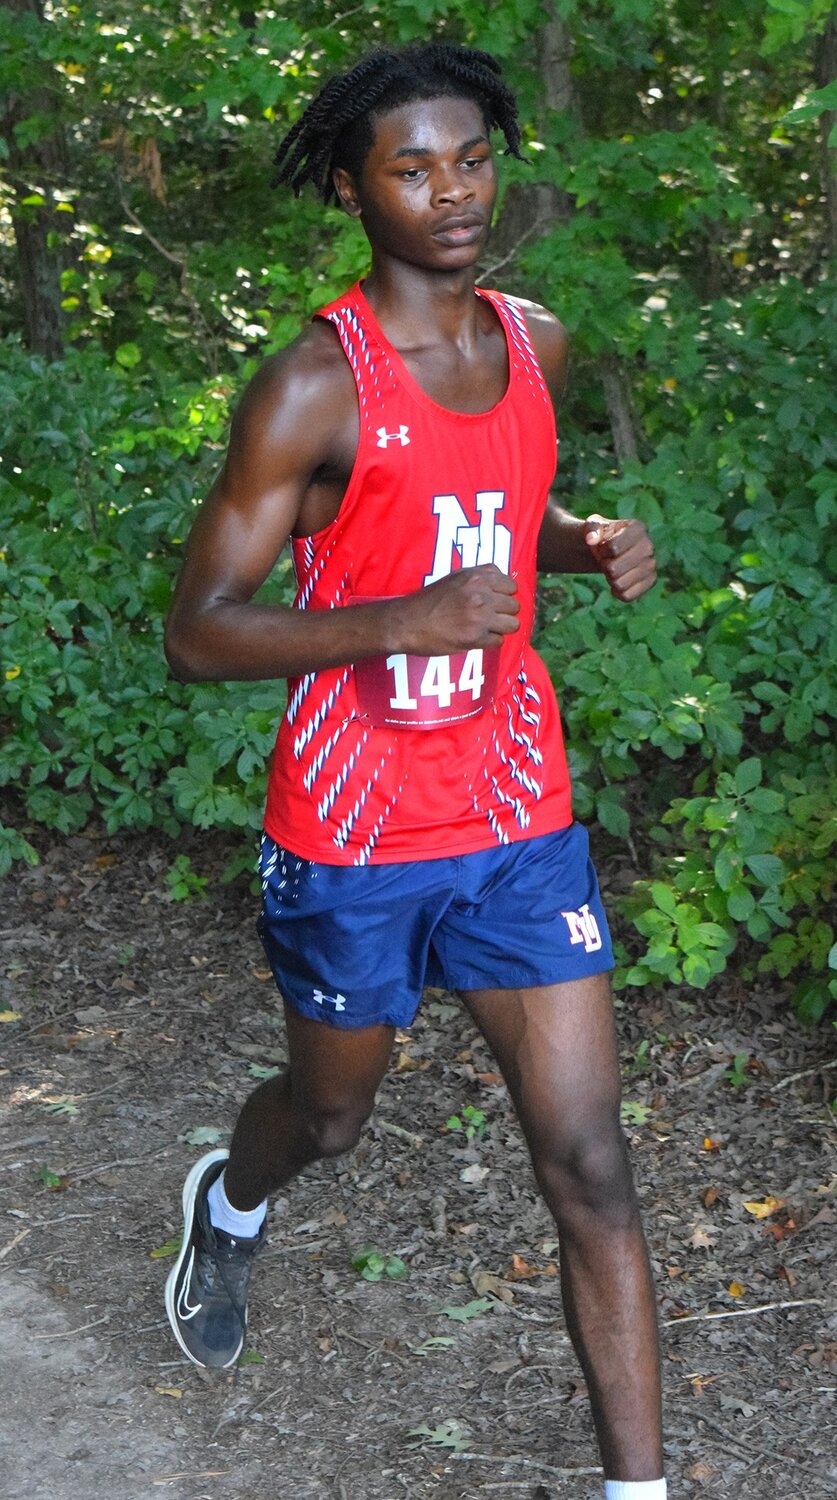 North Dorchester's Tyree Dotson emerged from the forest trail.